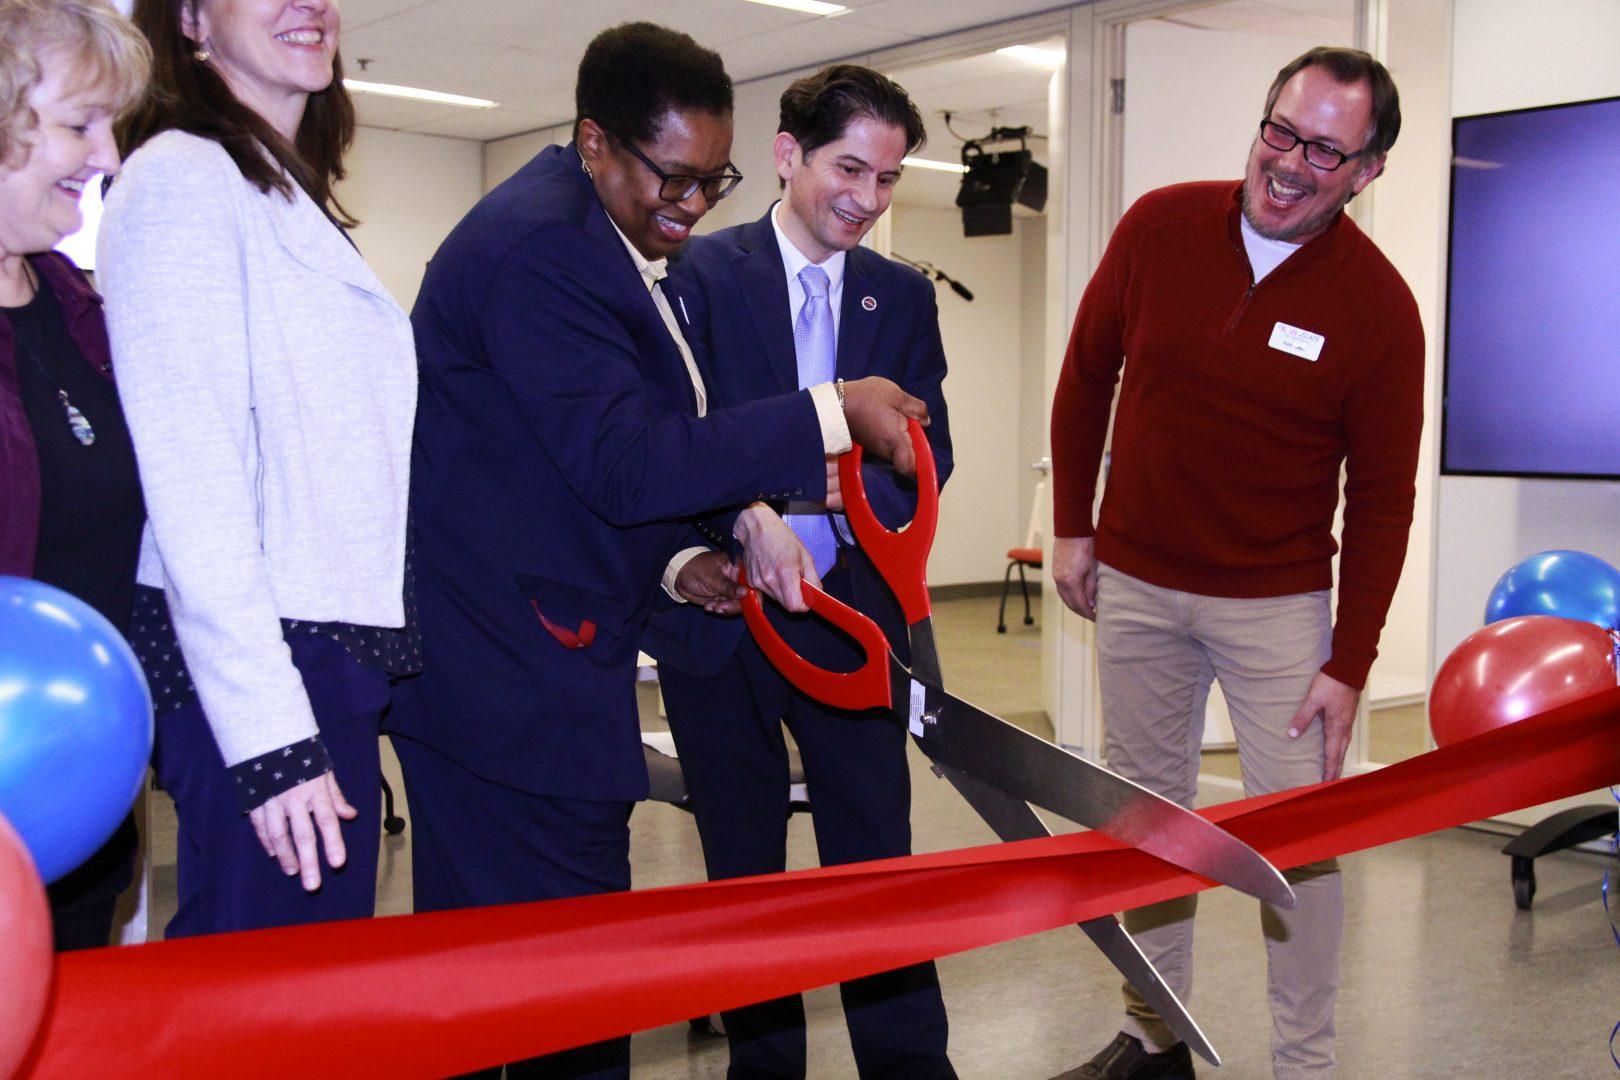 From center, Library Dean Delritta Hornbuckle, Fresno State Provost Saul Jimenez-Sandoval and media specialist Terry Lewis cut the ribbon for the launch of the Video Studios in the Henry Madden Library on Monday, Jan. 27, 2020.